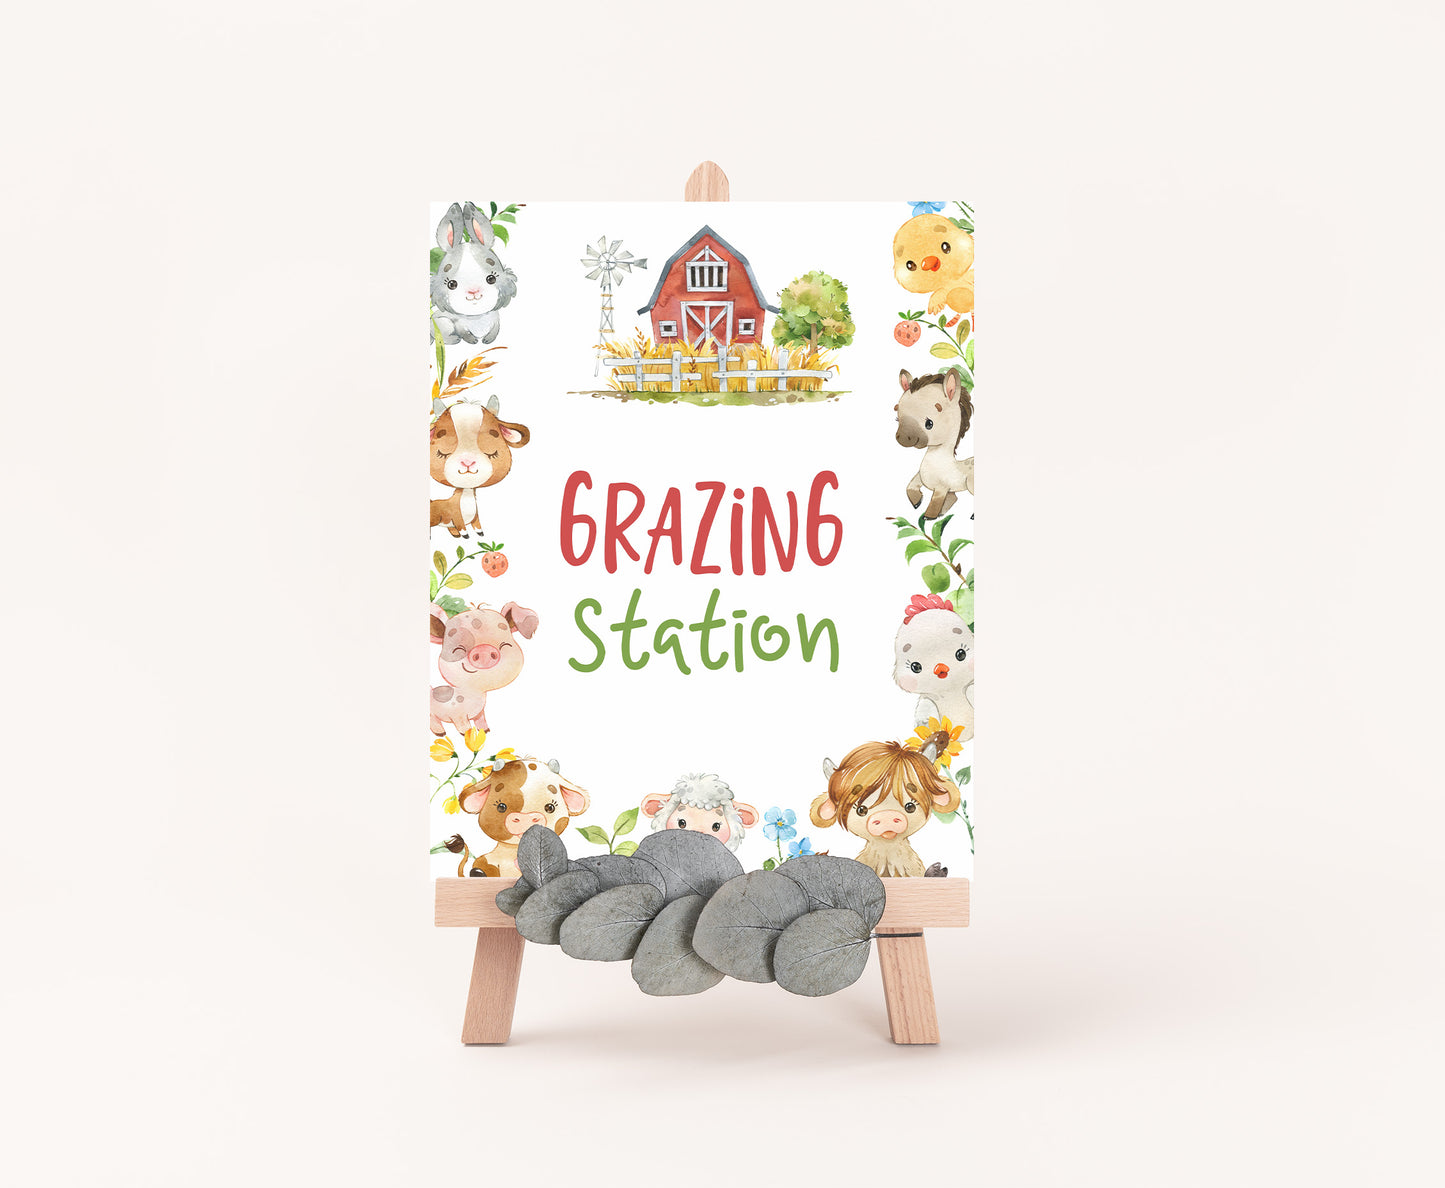 Grazing Station Sign Printable | Farm Party Table Decoration - 11d